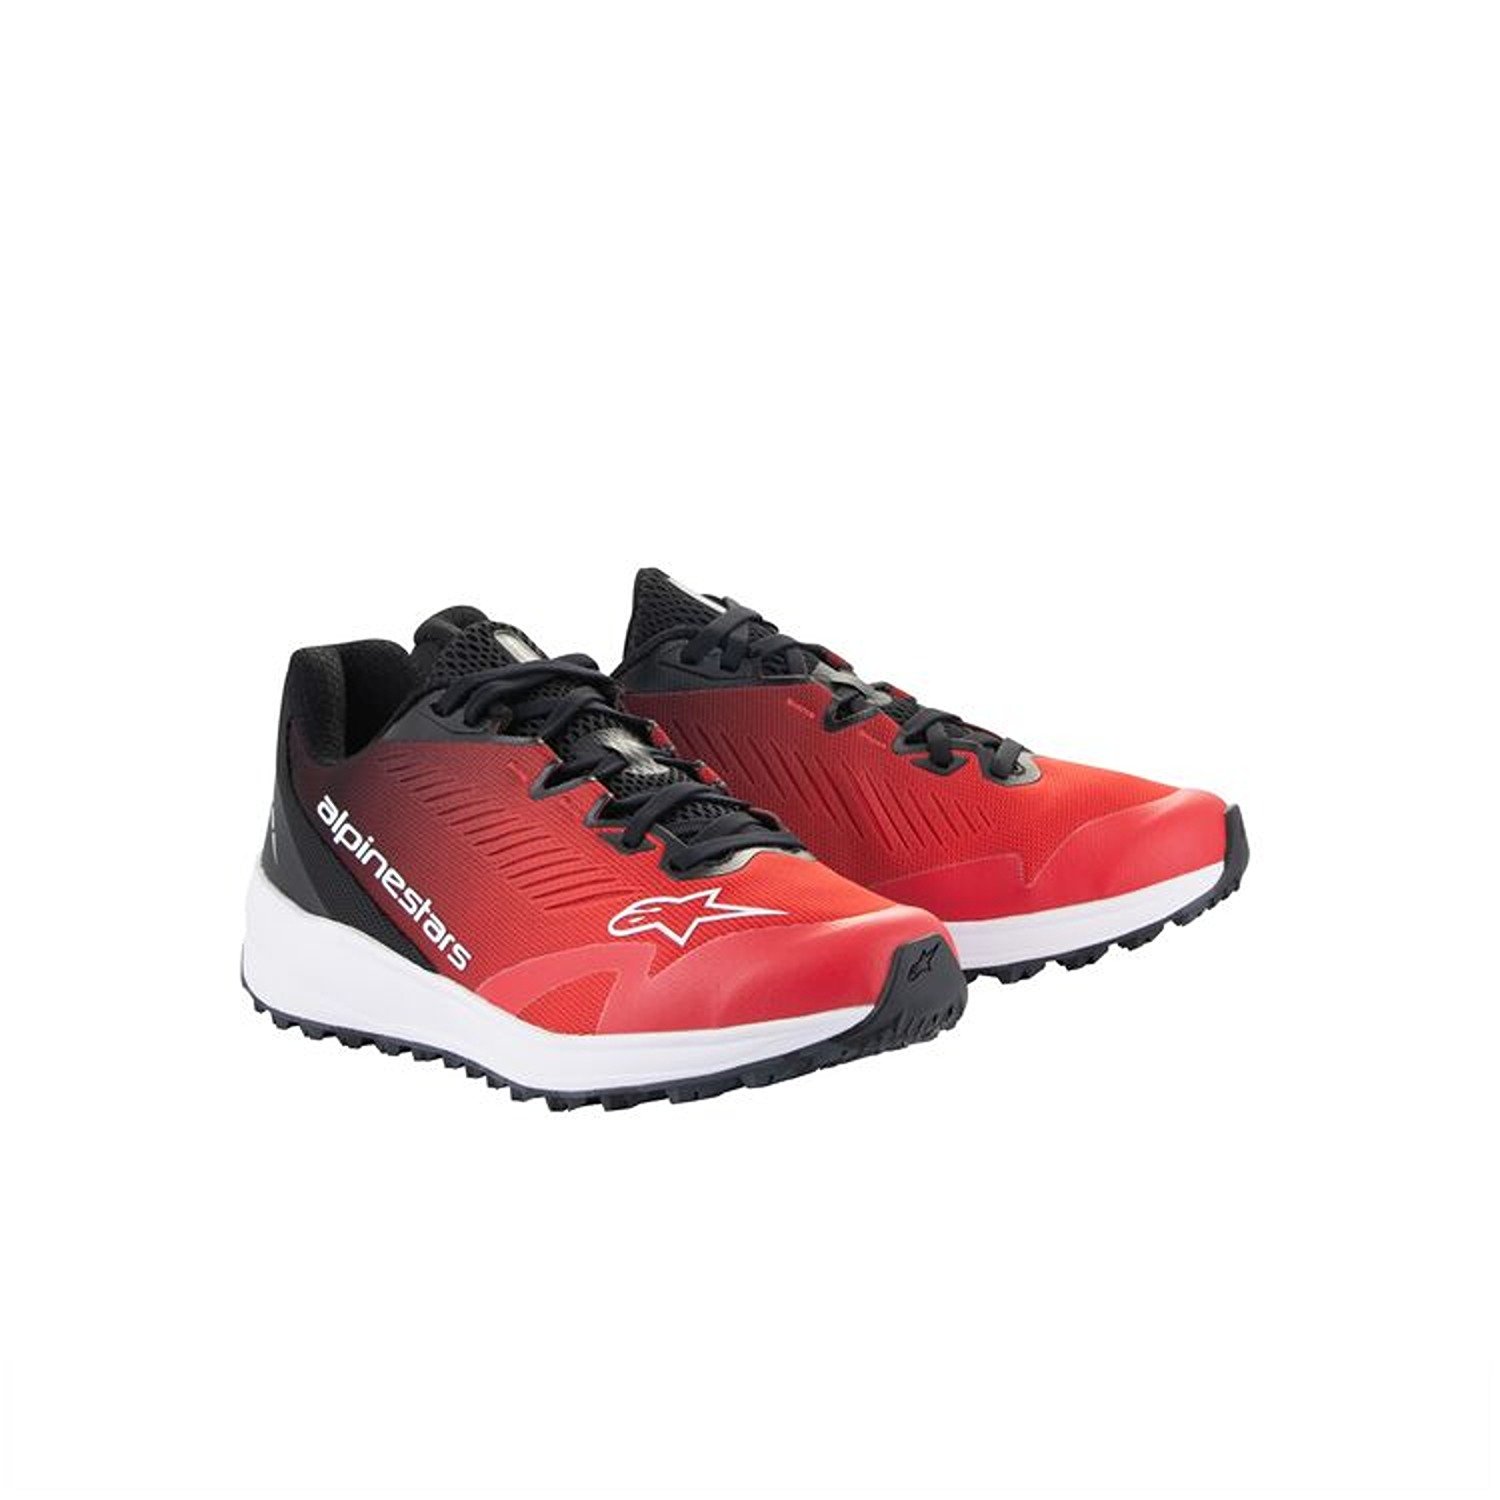 Image of Alpinestars Meta Road V2 Shoes Red Black White Taille US 5